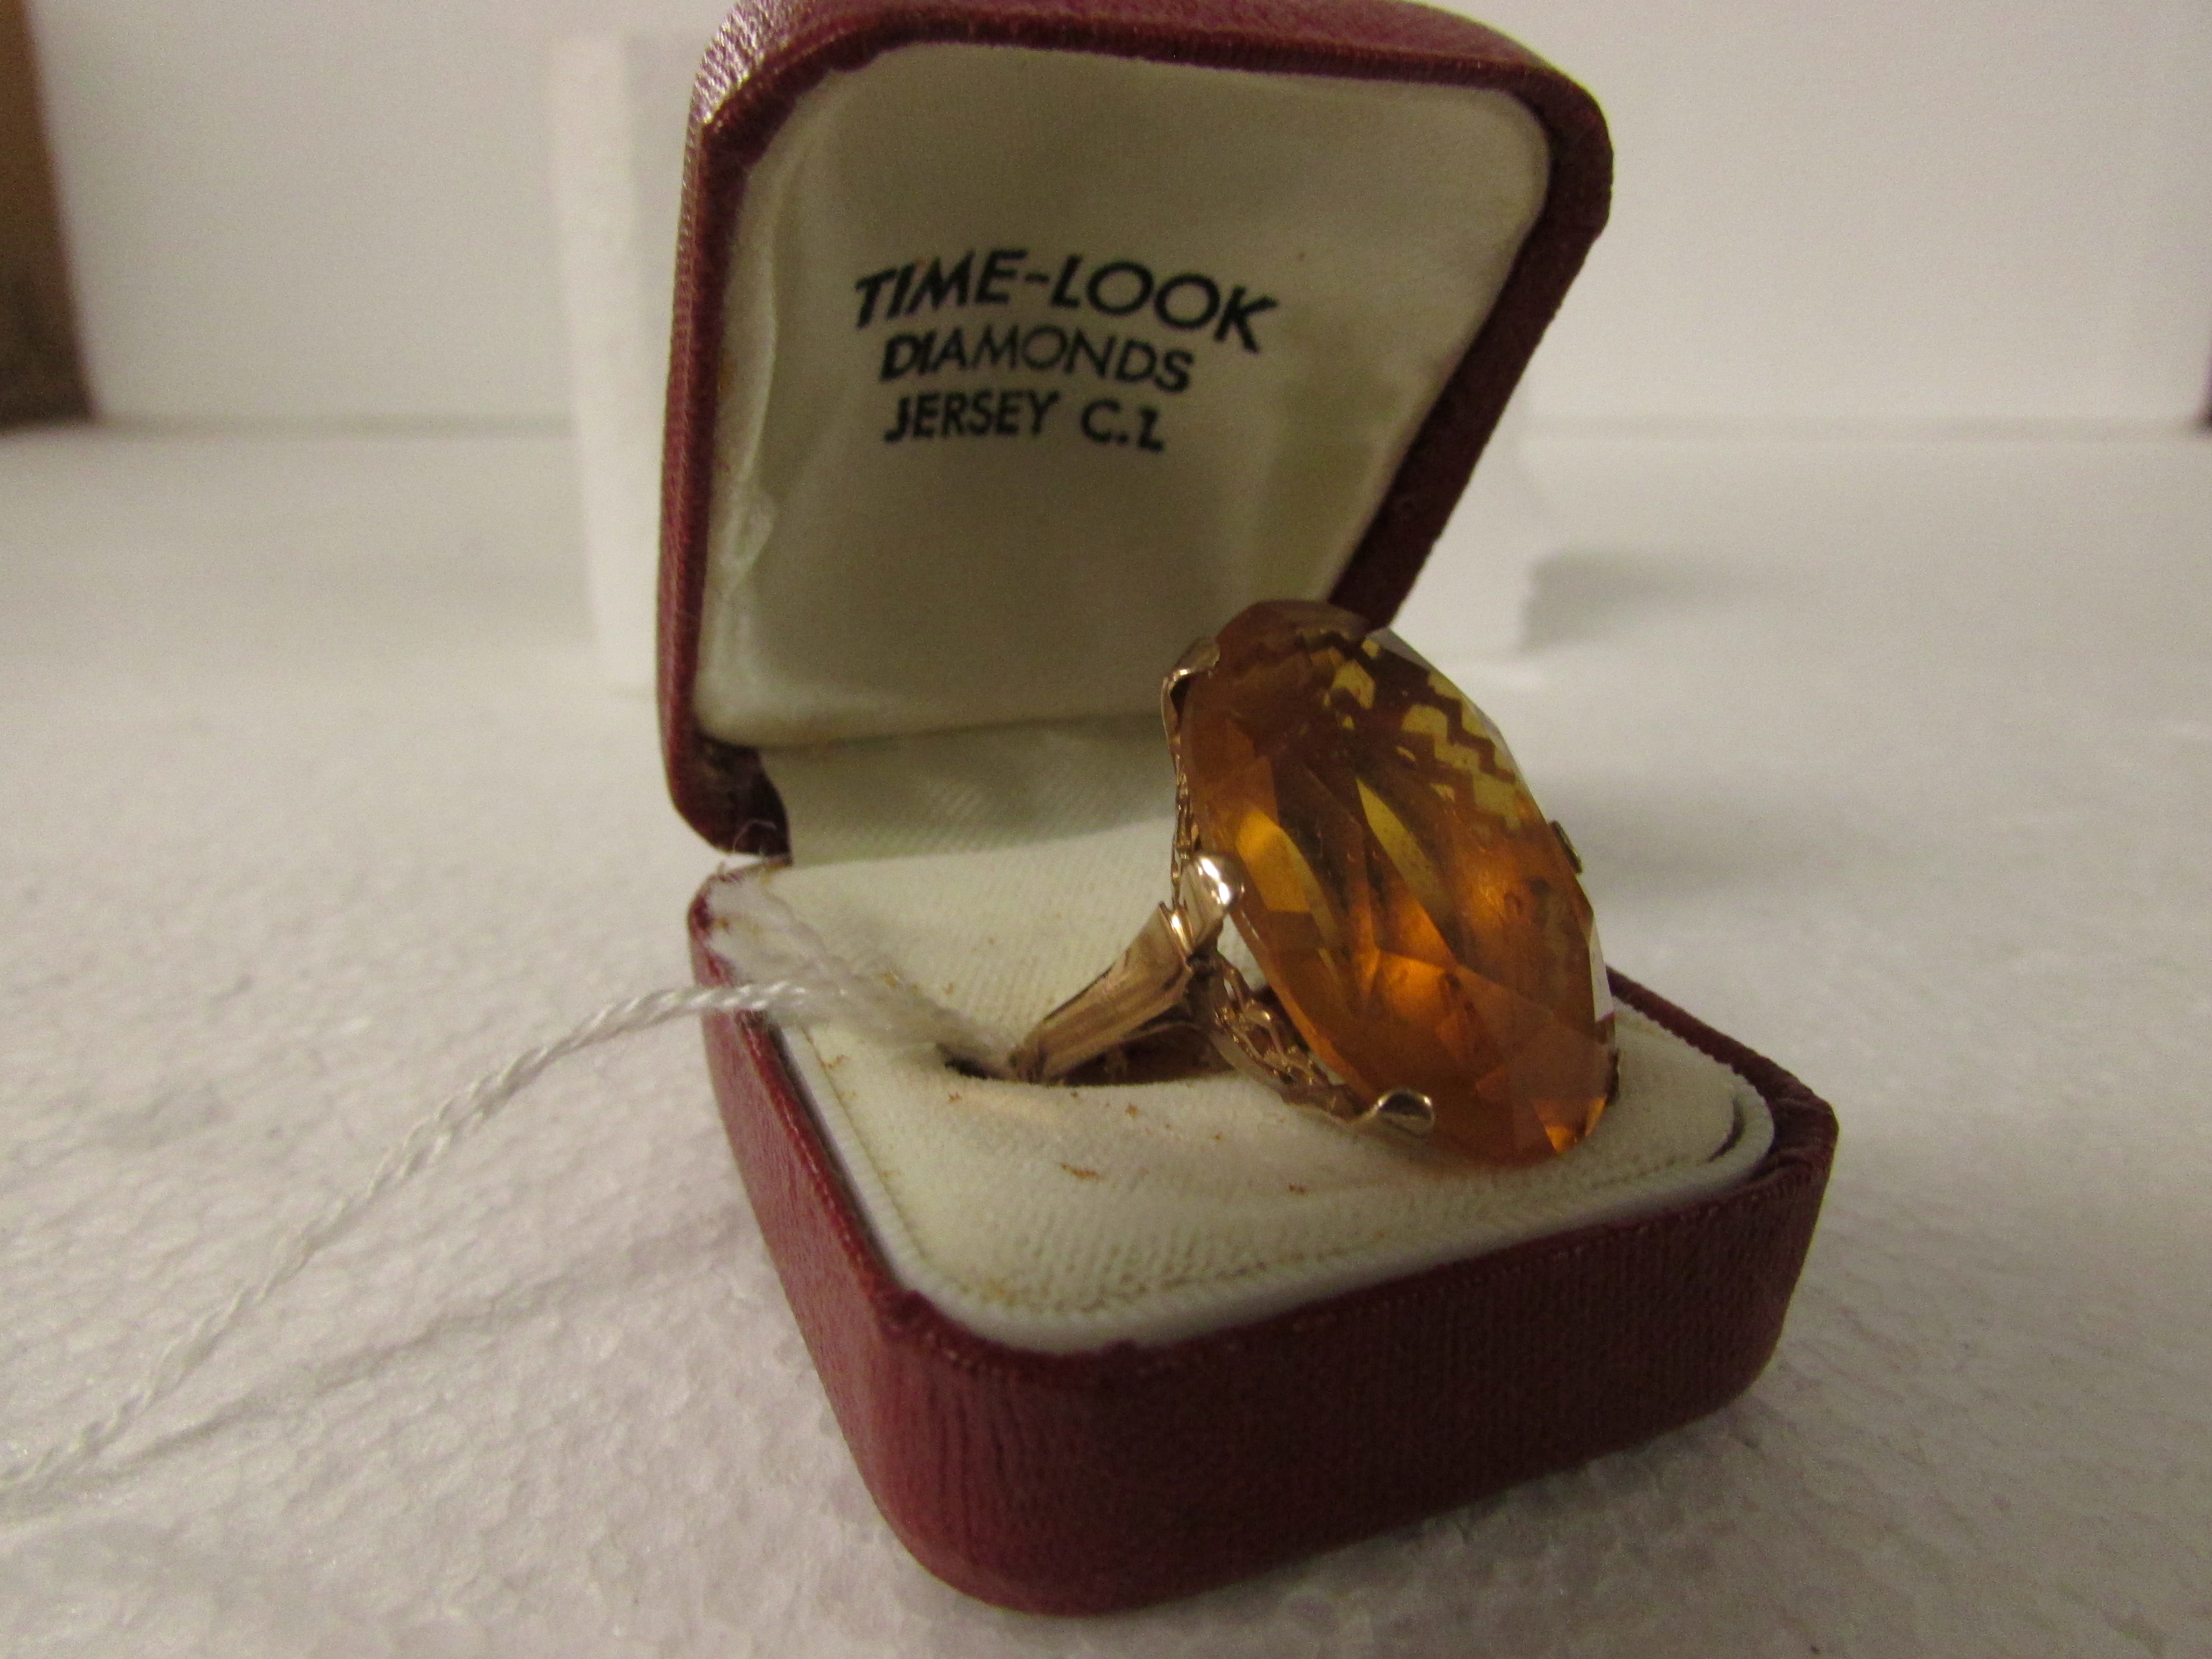 9ct gold dress ring set with a large oval cut tangerine colour stone (25mm x 18mm approx)